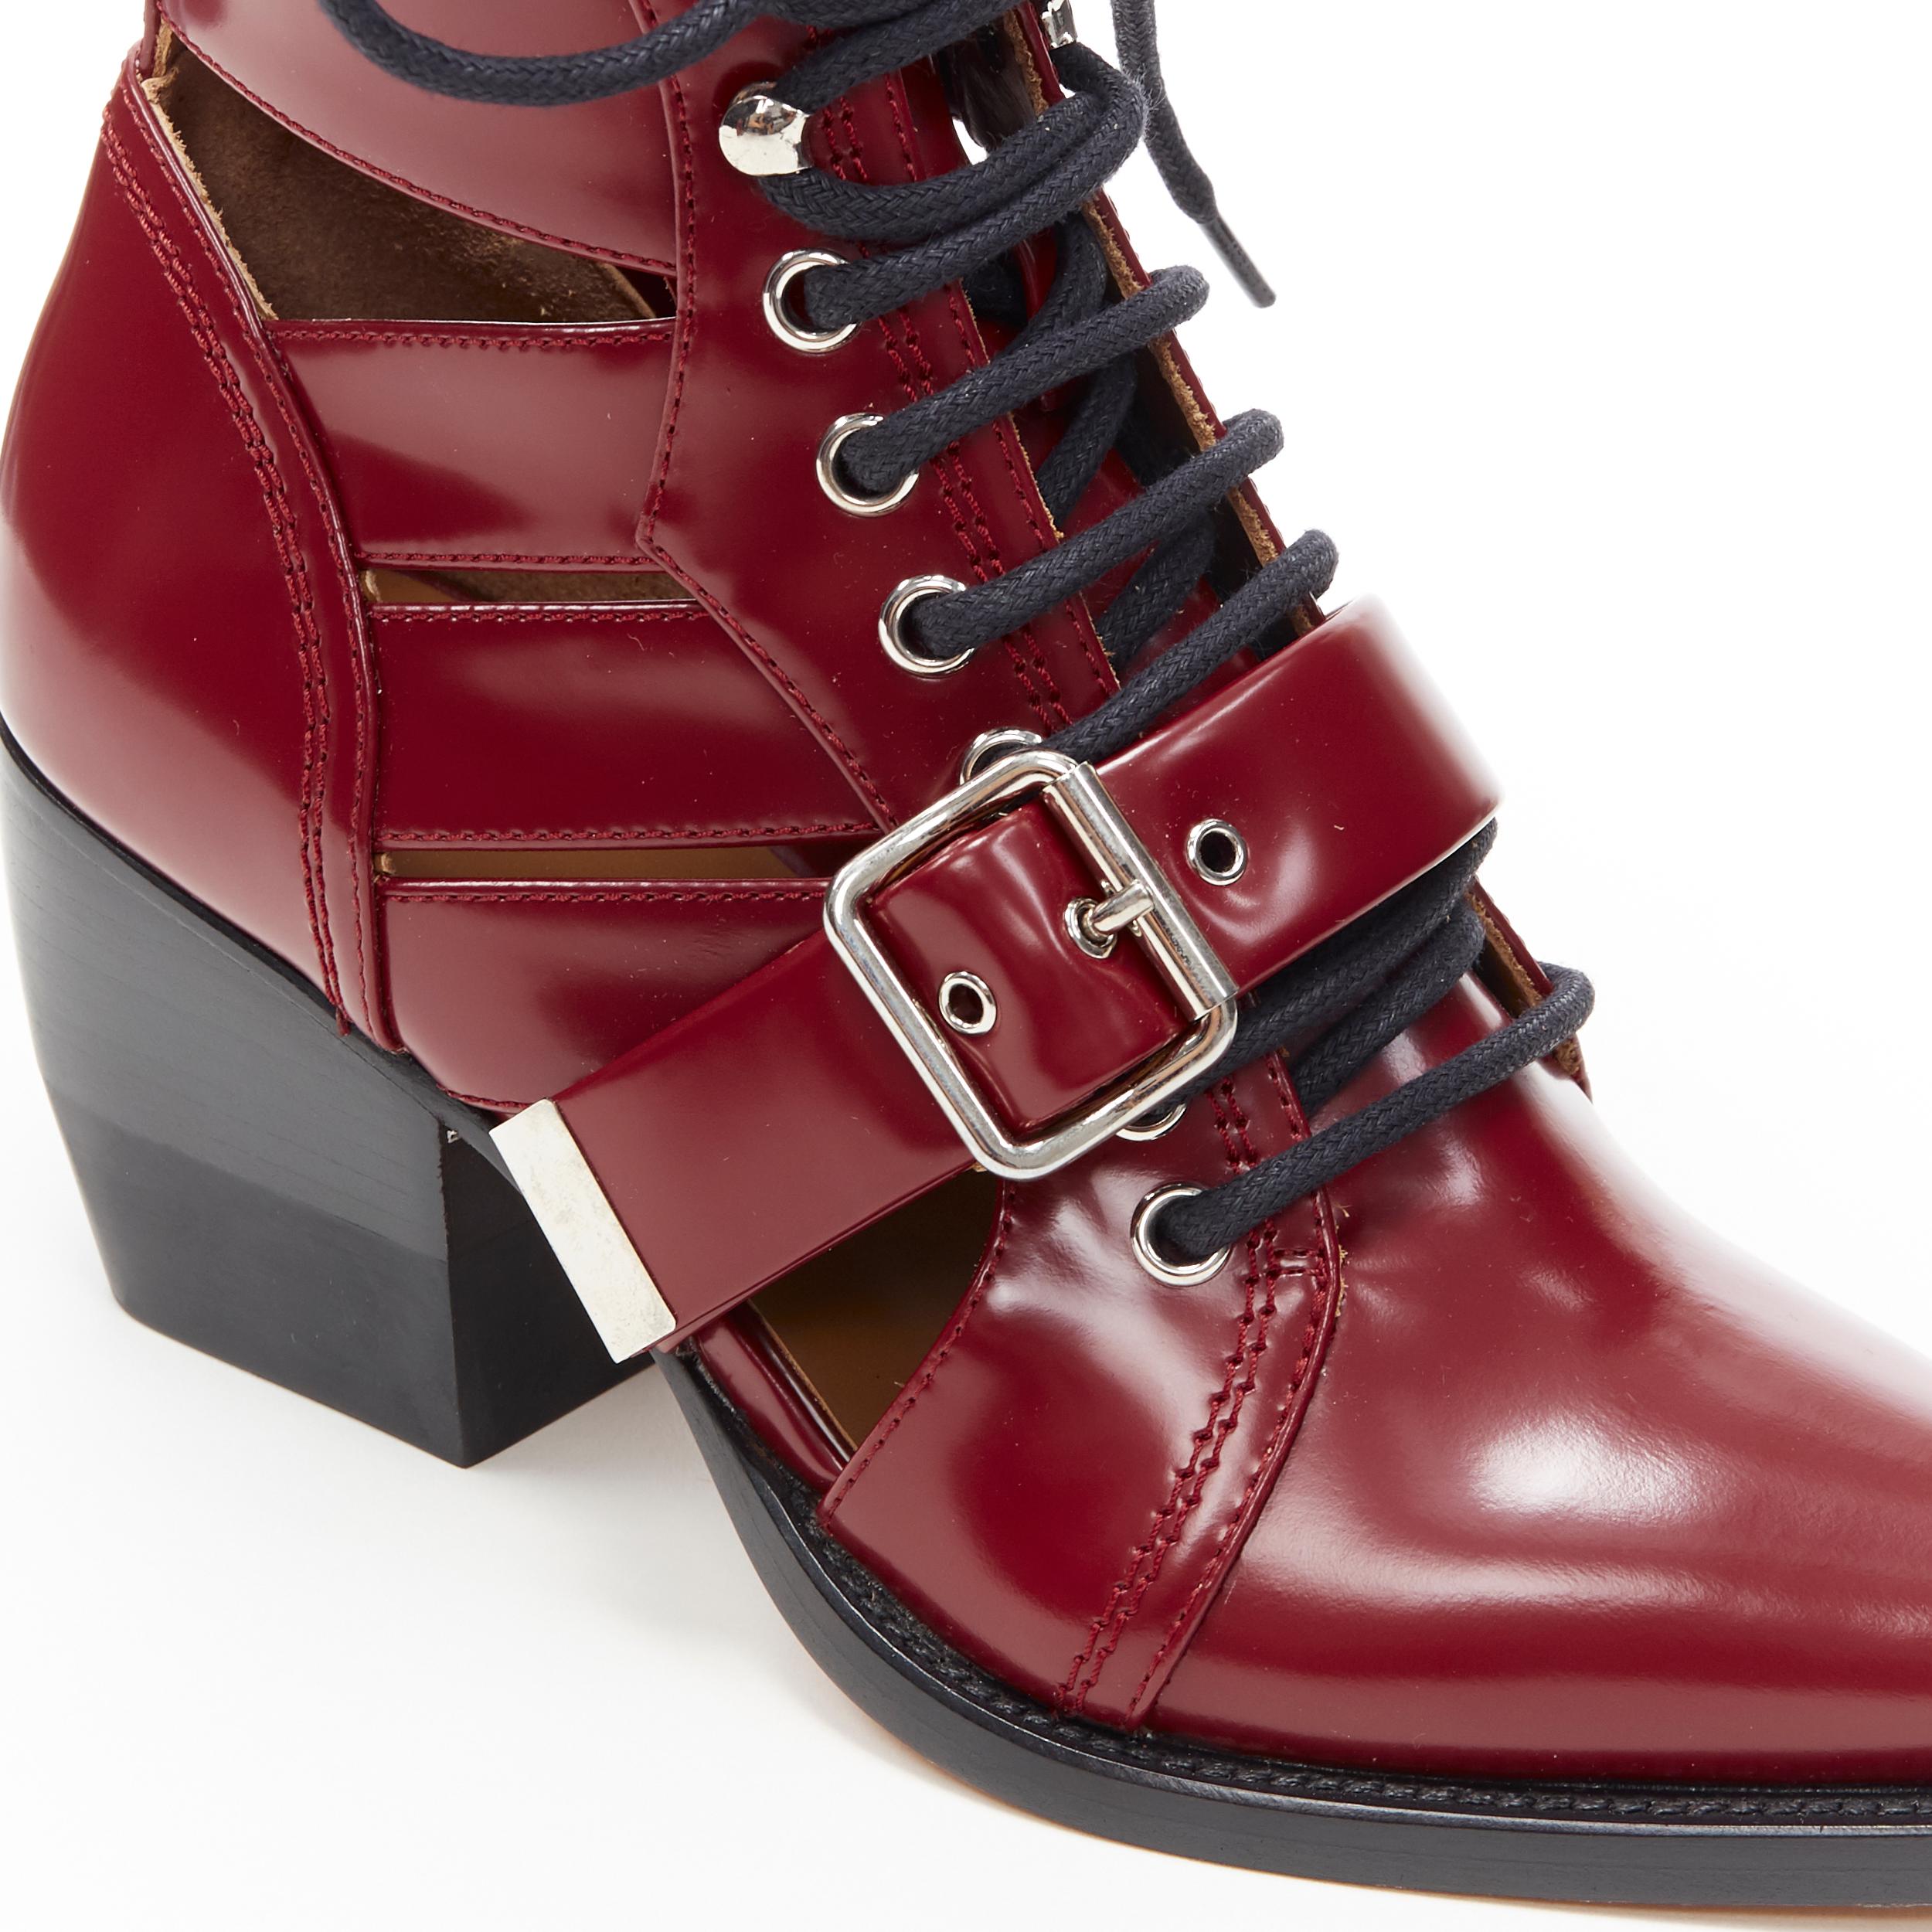 new CHLOE Rylee burgundy red leather cut out buckled pointy ankle boot EU39 1